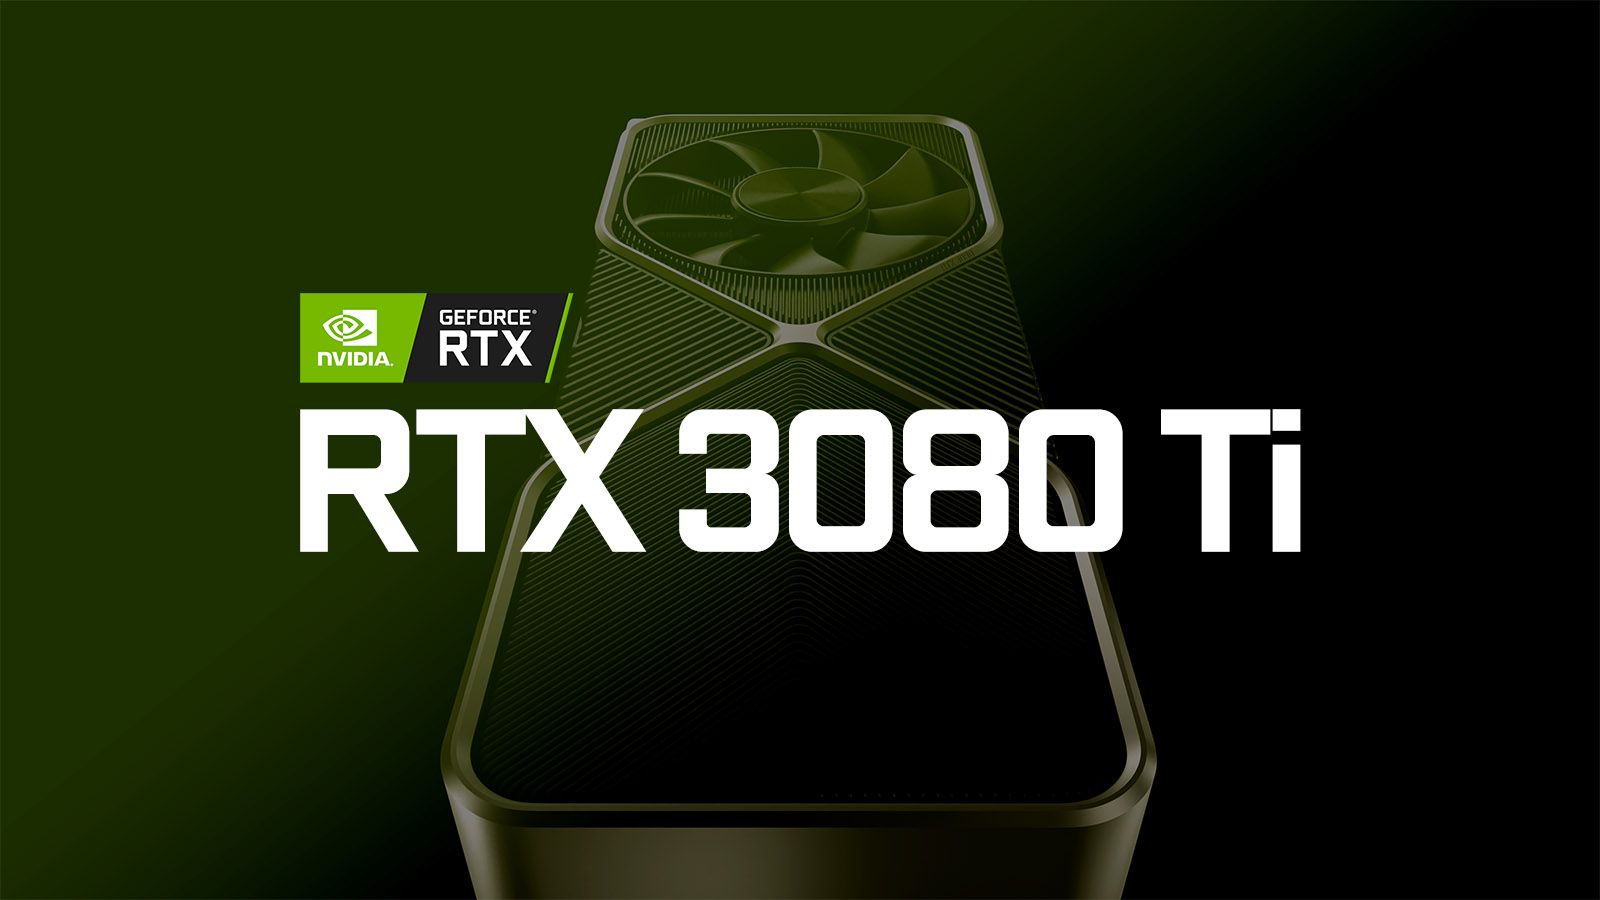 NVIDIA GeForce RTX 3080 Ti Spotted In HP OEM Driver Based Affair With 20GB Of VRAM